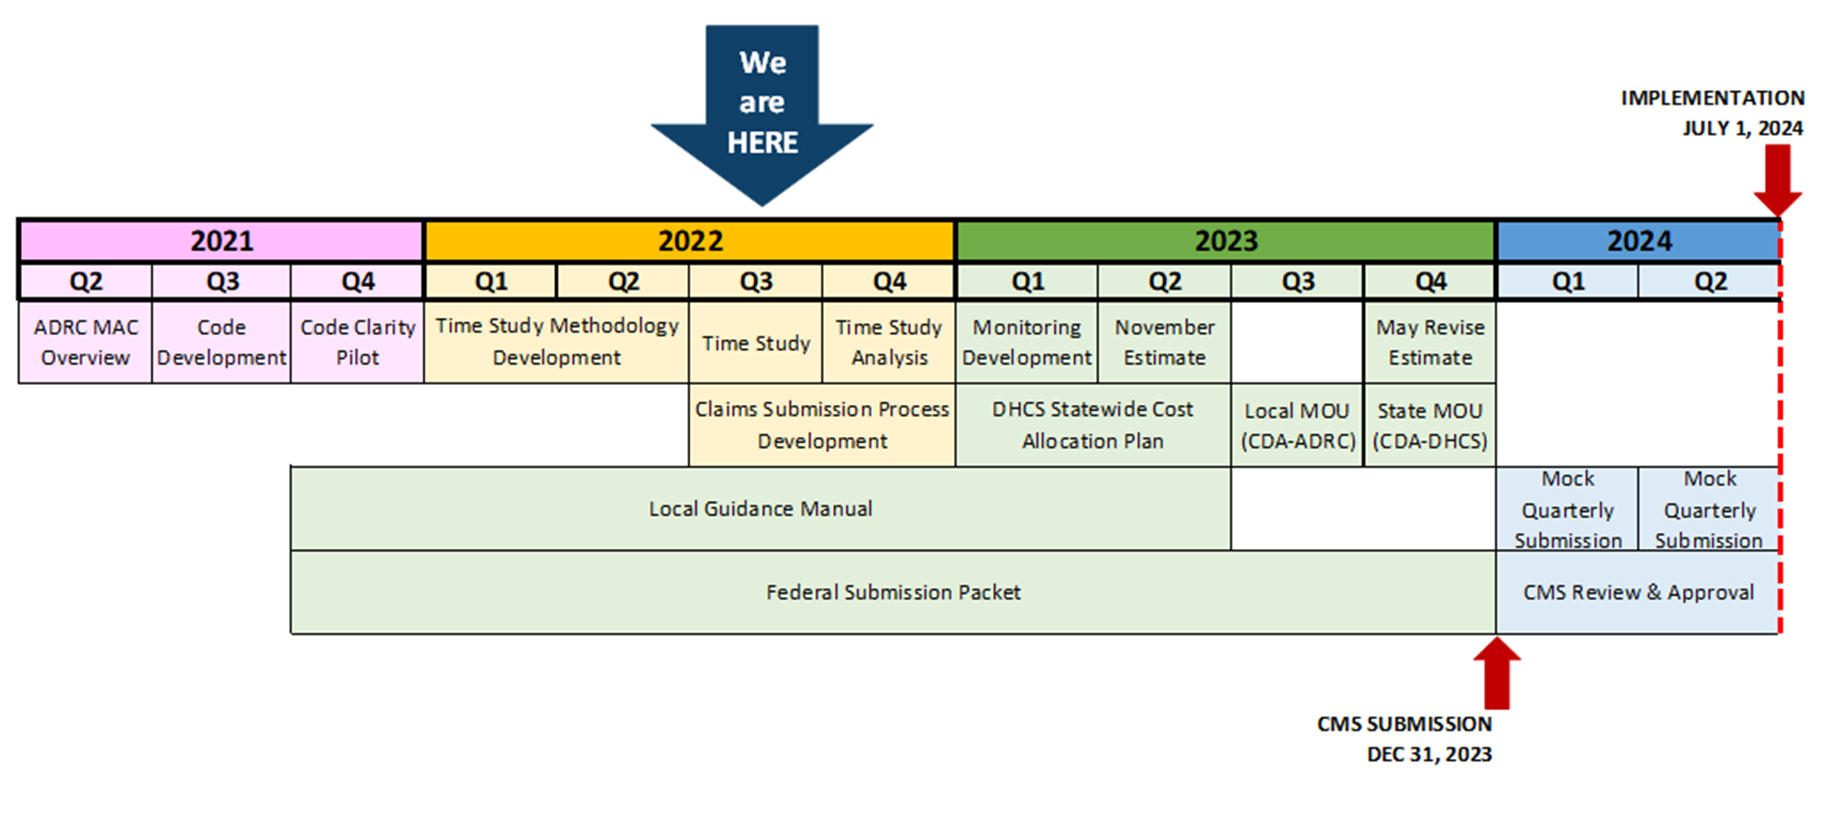 This image represents a timeline which outlines the major tasks that need to be completed in order to meet the July 1, 2024 implementation date for Medicaid Administrative Claiming. In calendar year 2021, an ADRC Medicaid Administrative Claiming overview training took place in quarter 2, codes were developed in quarter 3, and a code clarity pilot took place in quarter 4. For calendar year 2022, the time study methodology will be developed in quarters 1 and 2, the time study will take place in quarter 3, and the time study analysis will be conducted in quarter 4. The claims submission process will also be developed in quarters 3 and 4. In calendar year 2023, monitoring processes will be developed in quarter 1, the November estimate will be completed in quarter 2, and the May revision estimate will be completed in quarter 4. Also, the DHCS statewide cost allocation plan will be updated in quarters 1 and 2, the local MOU between CDA and ADRC partners will be drafted in quarter 3, and the state MOU between CDA and DHCS will be drafted in quarter 4. The local guidance manual and federal submission packets will be developed simultaneously throughout calendar years 2021, 2022, and 2023. The federal packet to CMS will be submitted by December 31, 2023 to allow 6 months for review and approval prior to full implementation by July 1, 2024. During calendar year 2024, while awaiting review and approval by CMS, mock quarterly submissions will be conducted during quarters 1 and 2.